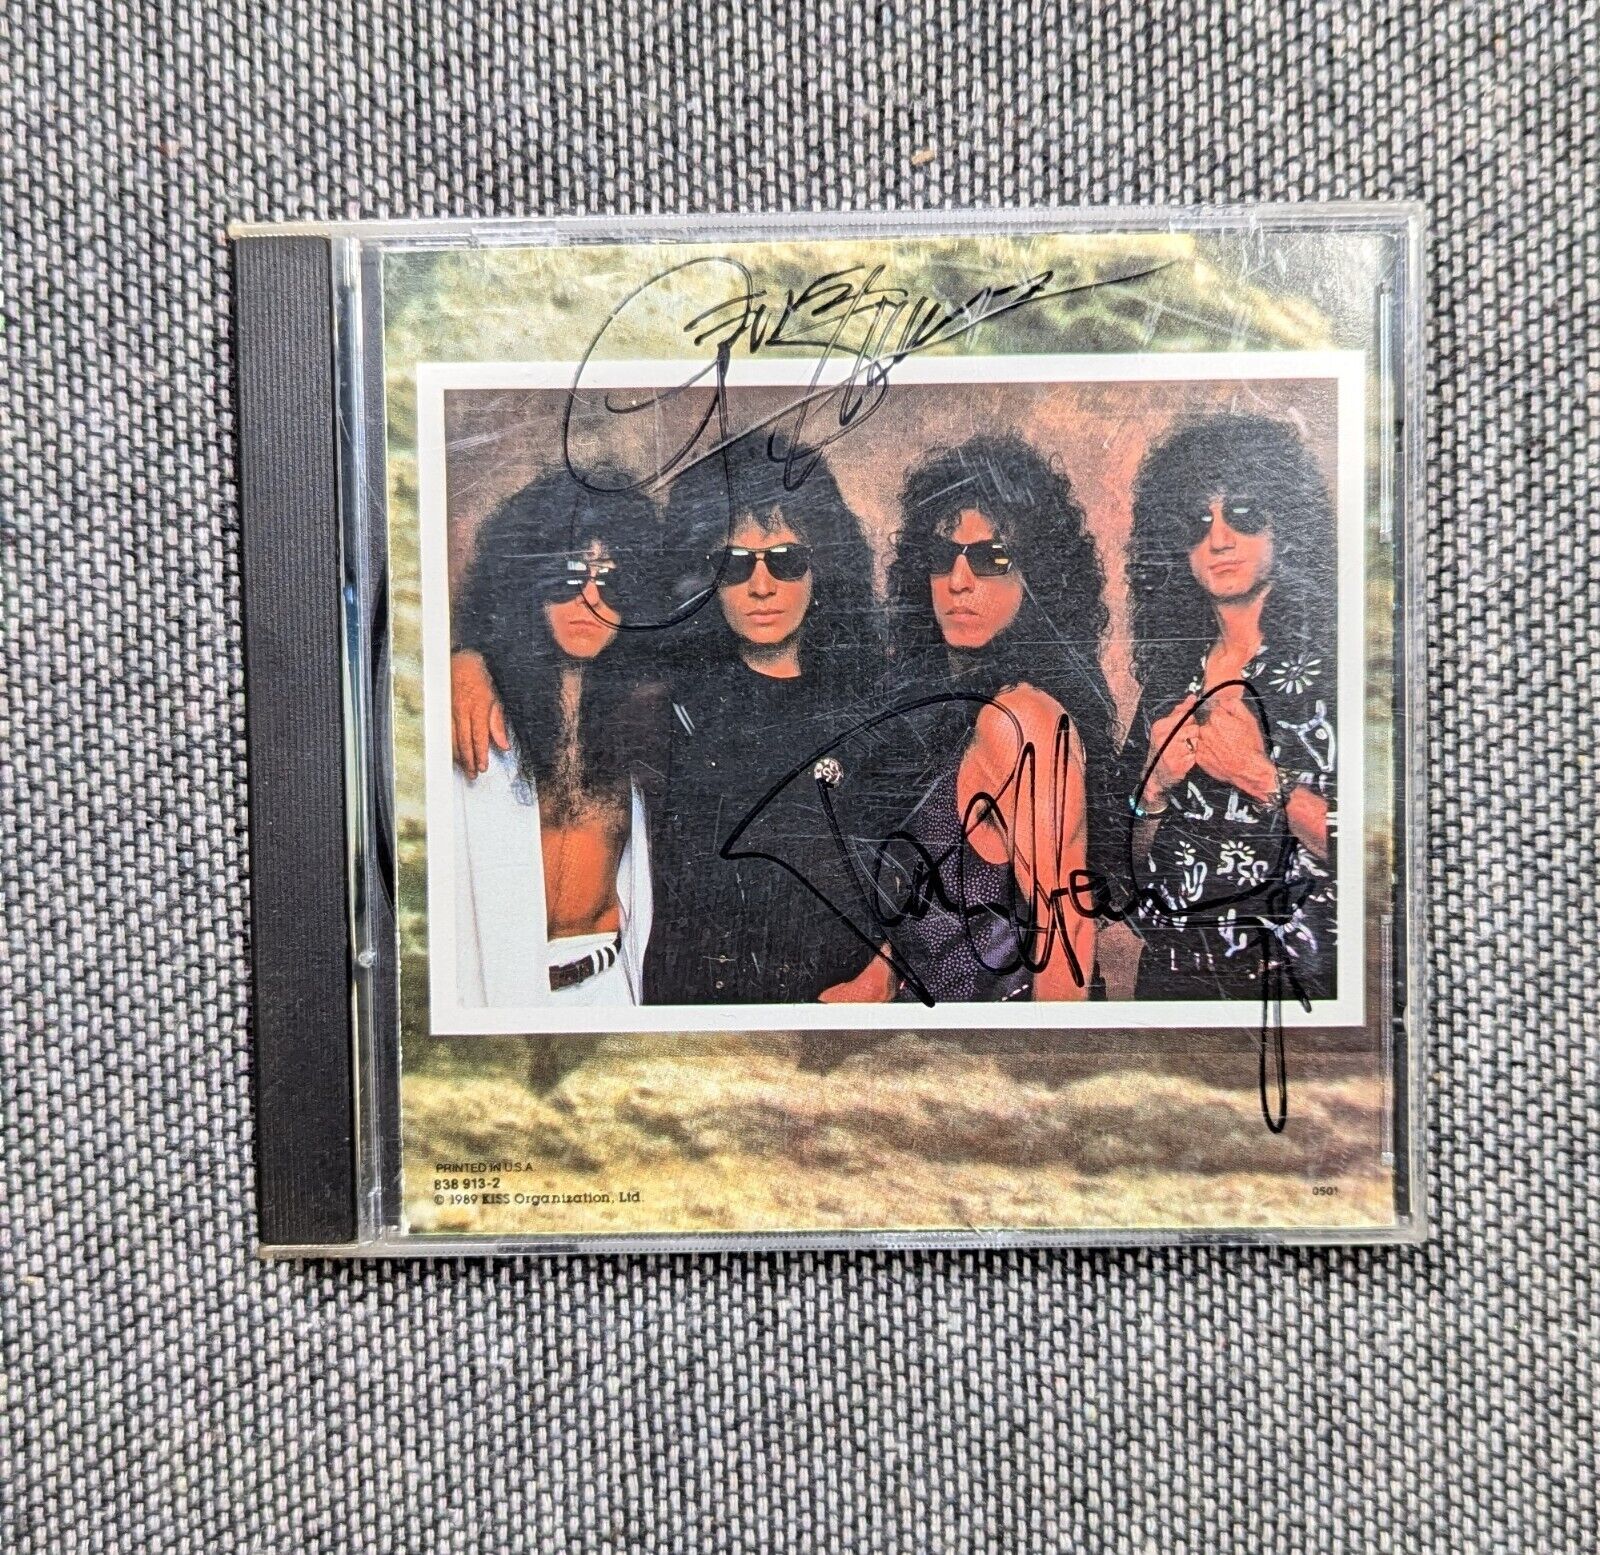 KISS - CD COVER SIGNED Gene Simmons And Paul Stanley 1989 